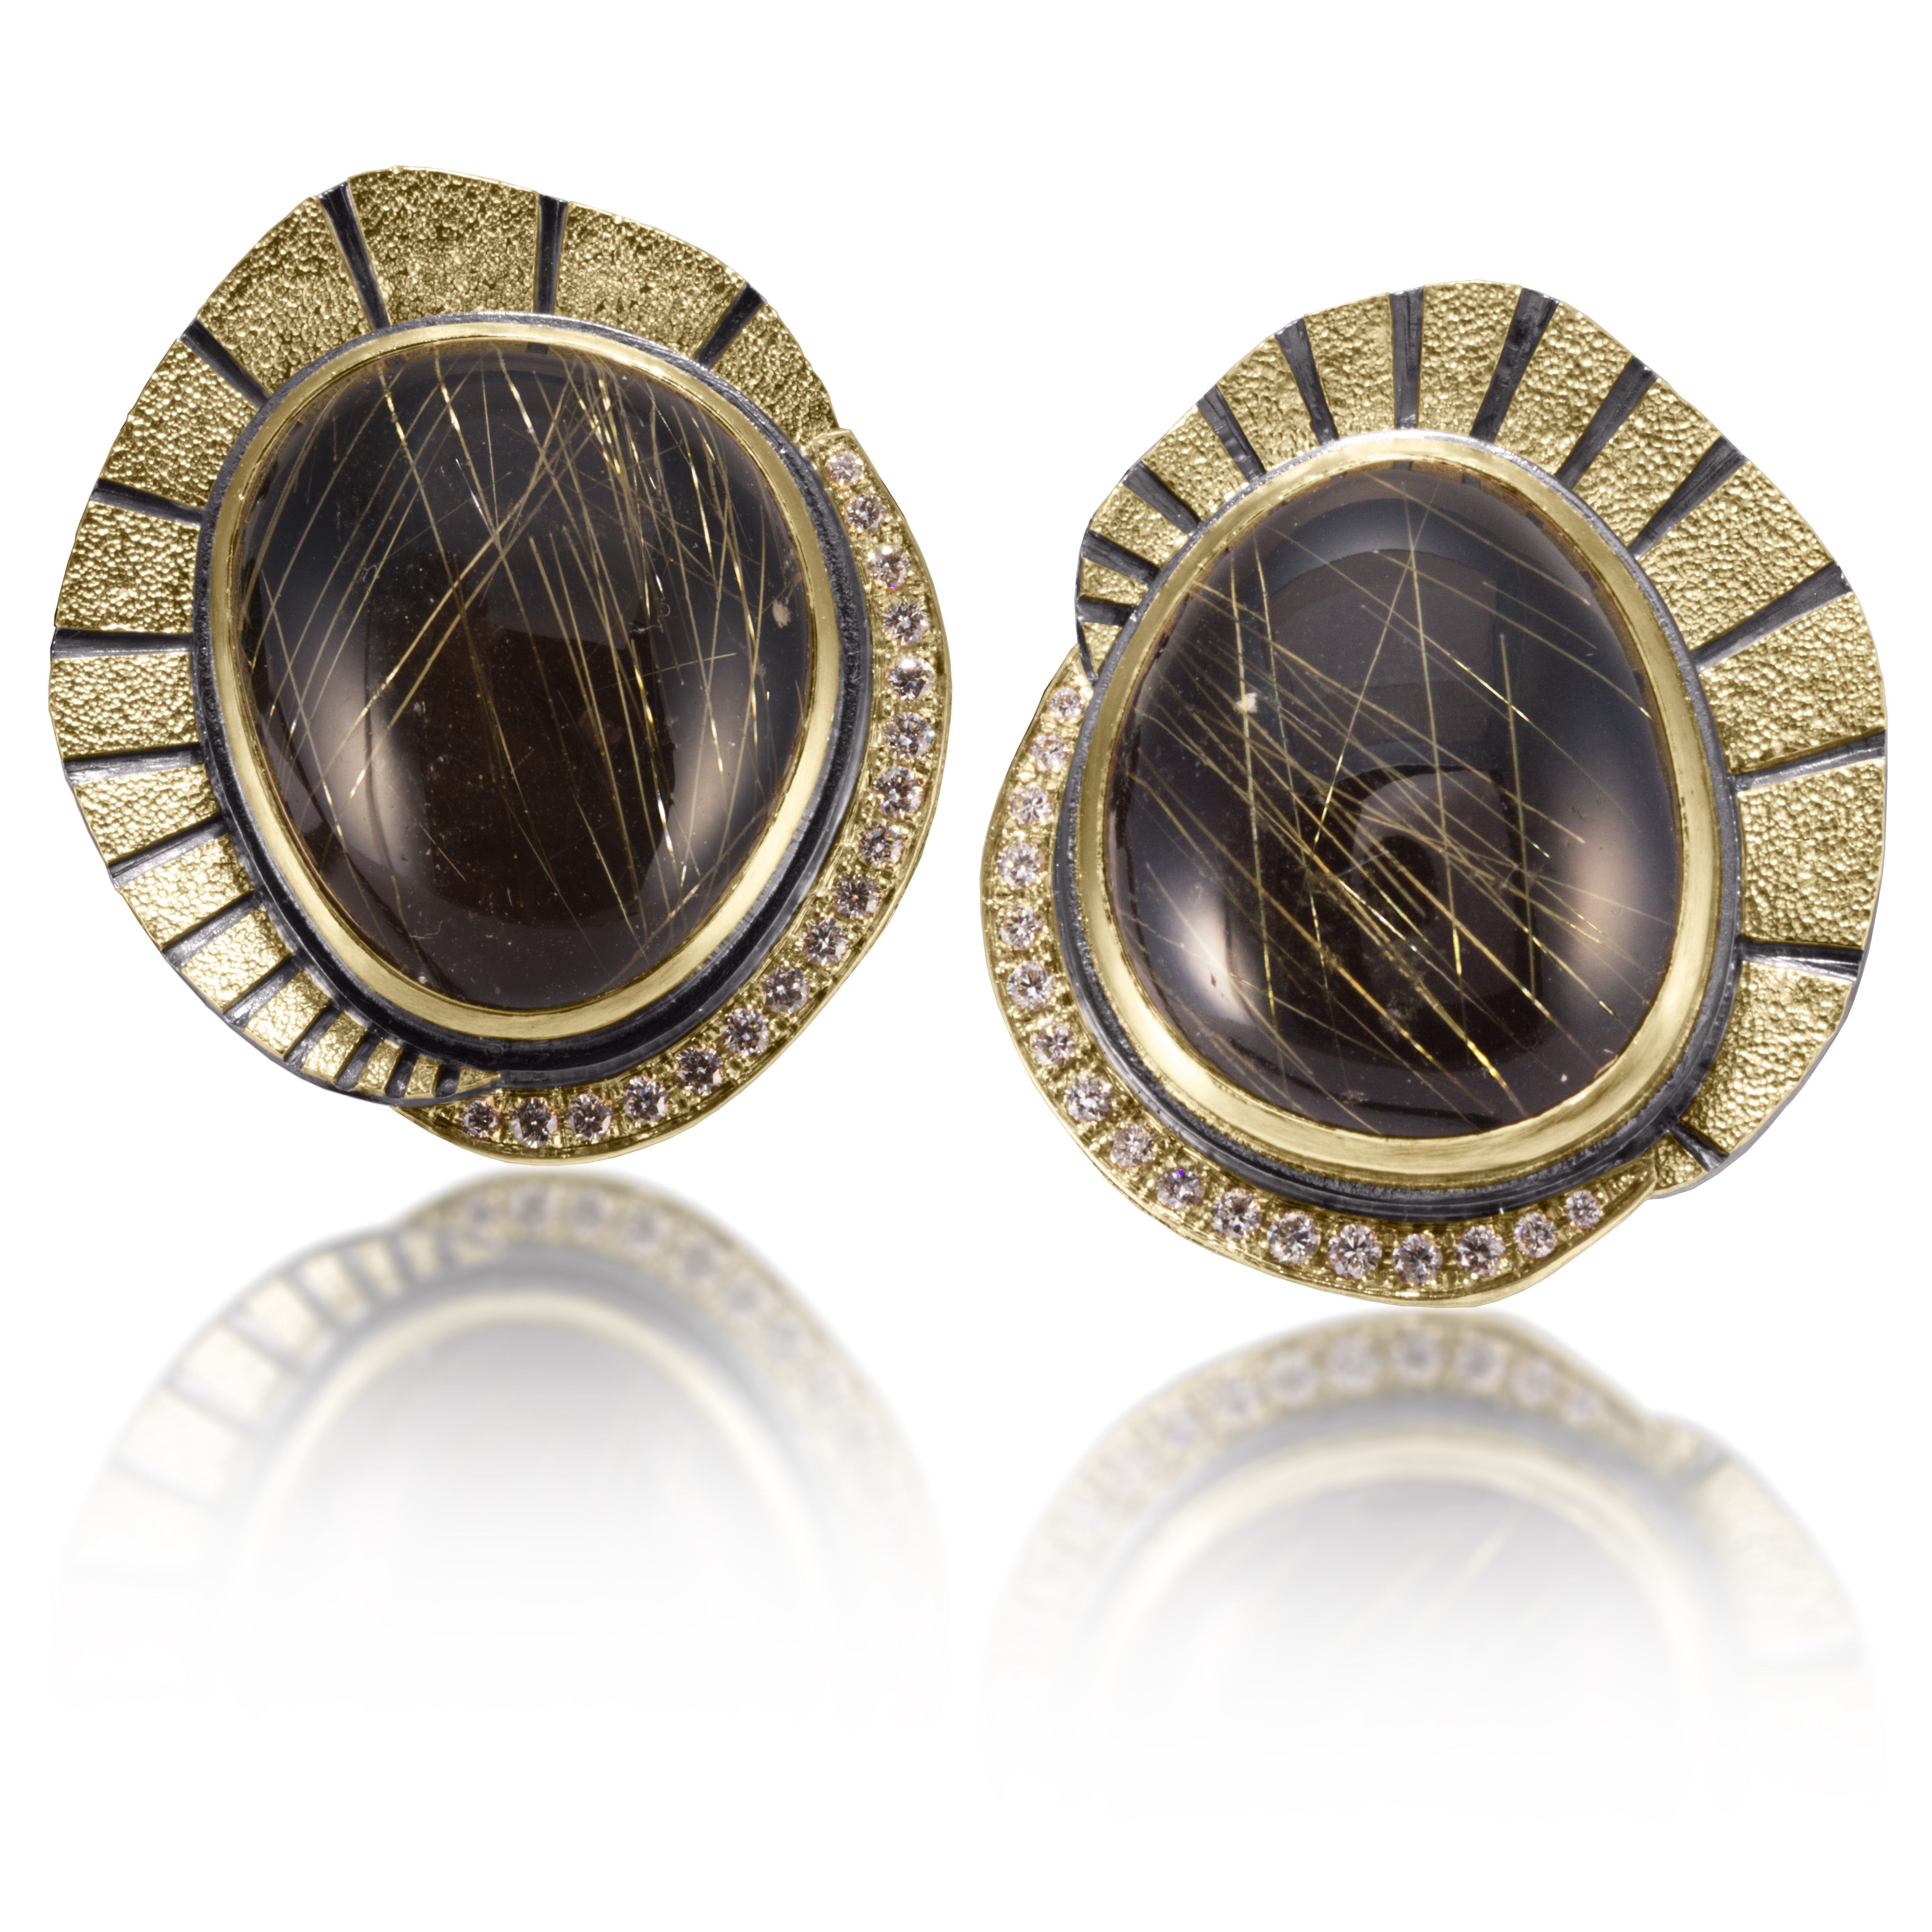 One of a kind Stripe Earring E-2002 in 18k gold and oxidized sterling silver with bezel set, round rutilated quartz backed with black onyx. Hand fabricated, stipple textured and engraved mixed metals. Bright cut pave set white diamonds, .370 tcw., 14k gold posts and oxidized sterling lever backs.